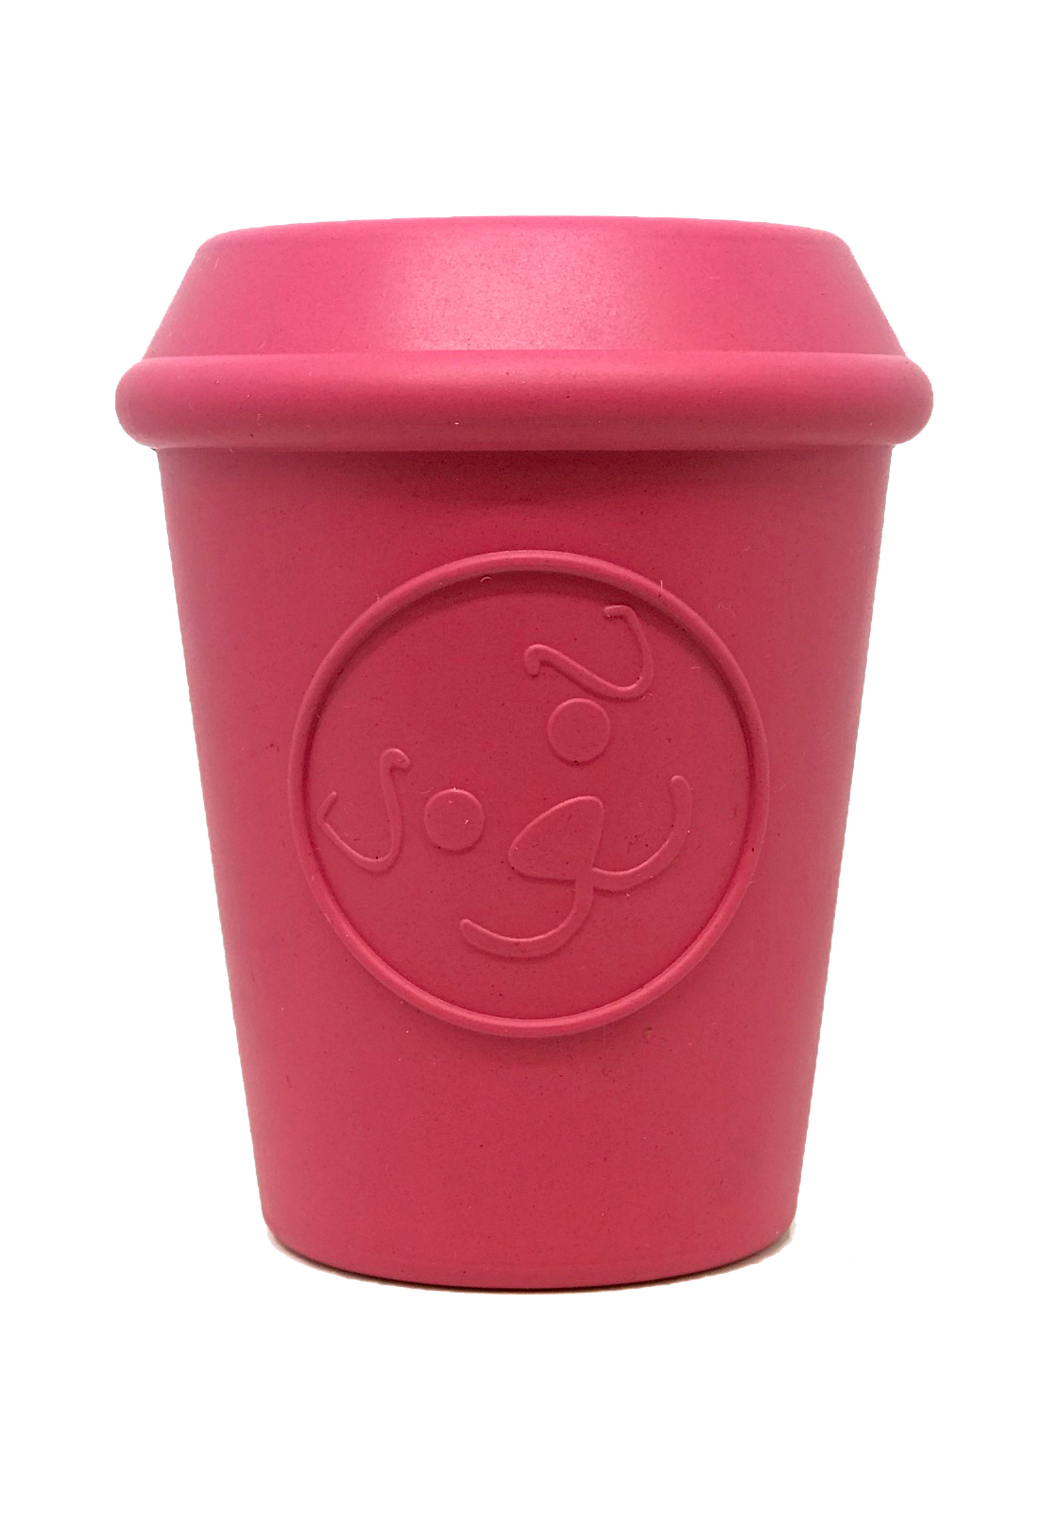 Coffee Cup Durable Rubber Chew Toy & Treat Dispenser - Pink